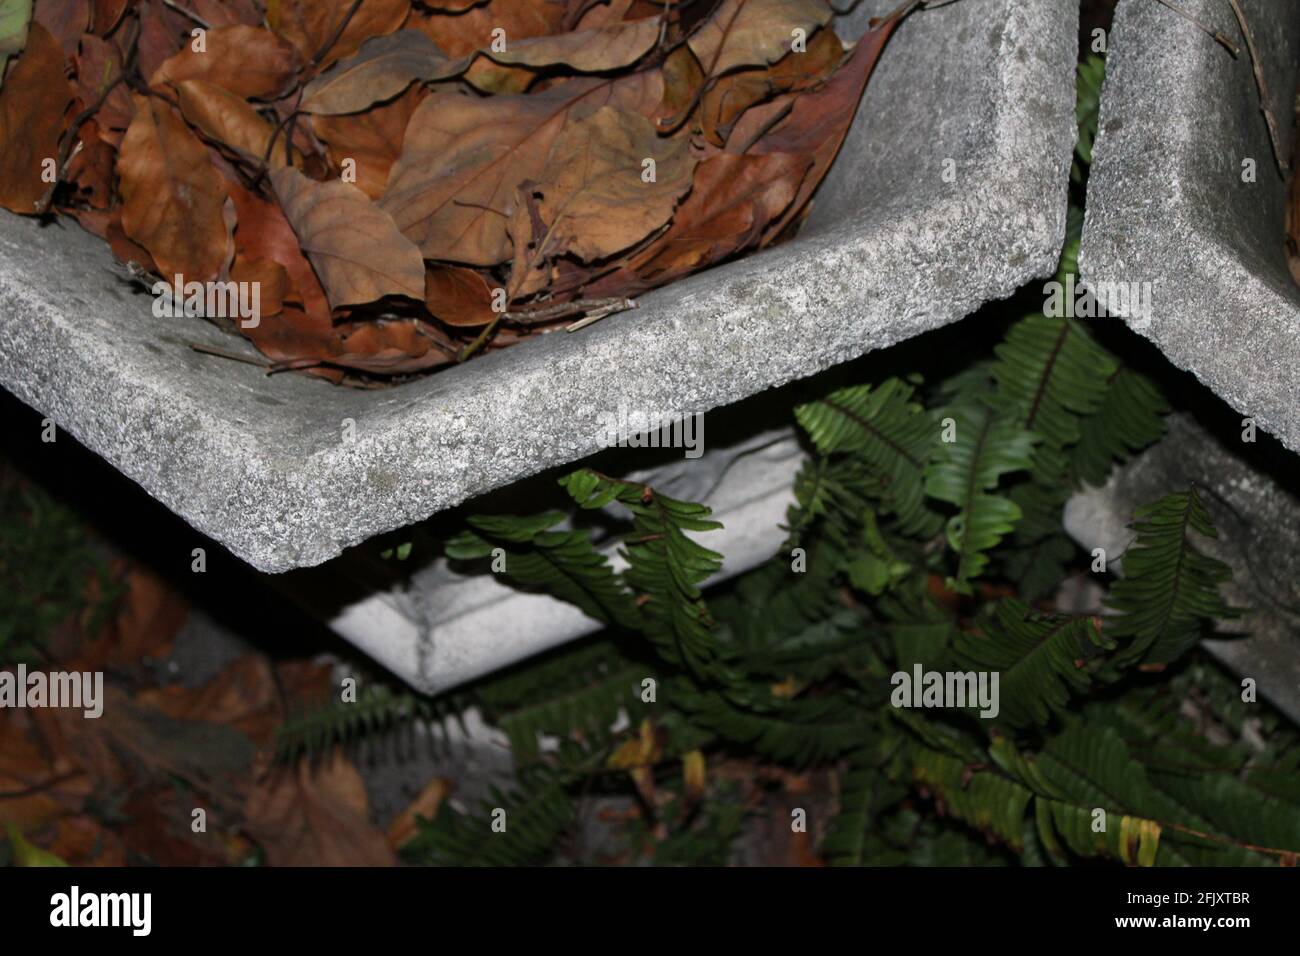 Bunches of brown fall leaves in the dark, inside a large stone decorative bowl, outdoors with leaves. Stock Photo